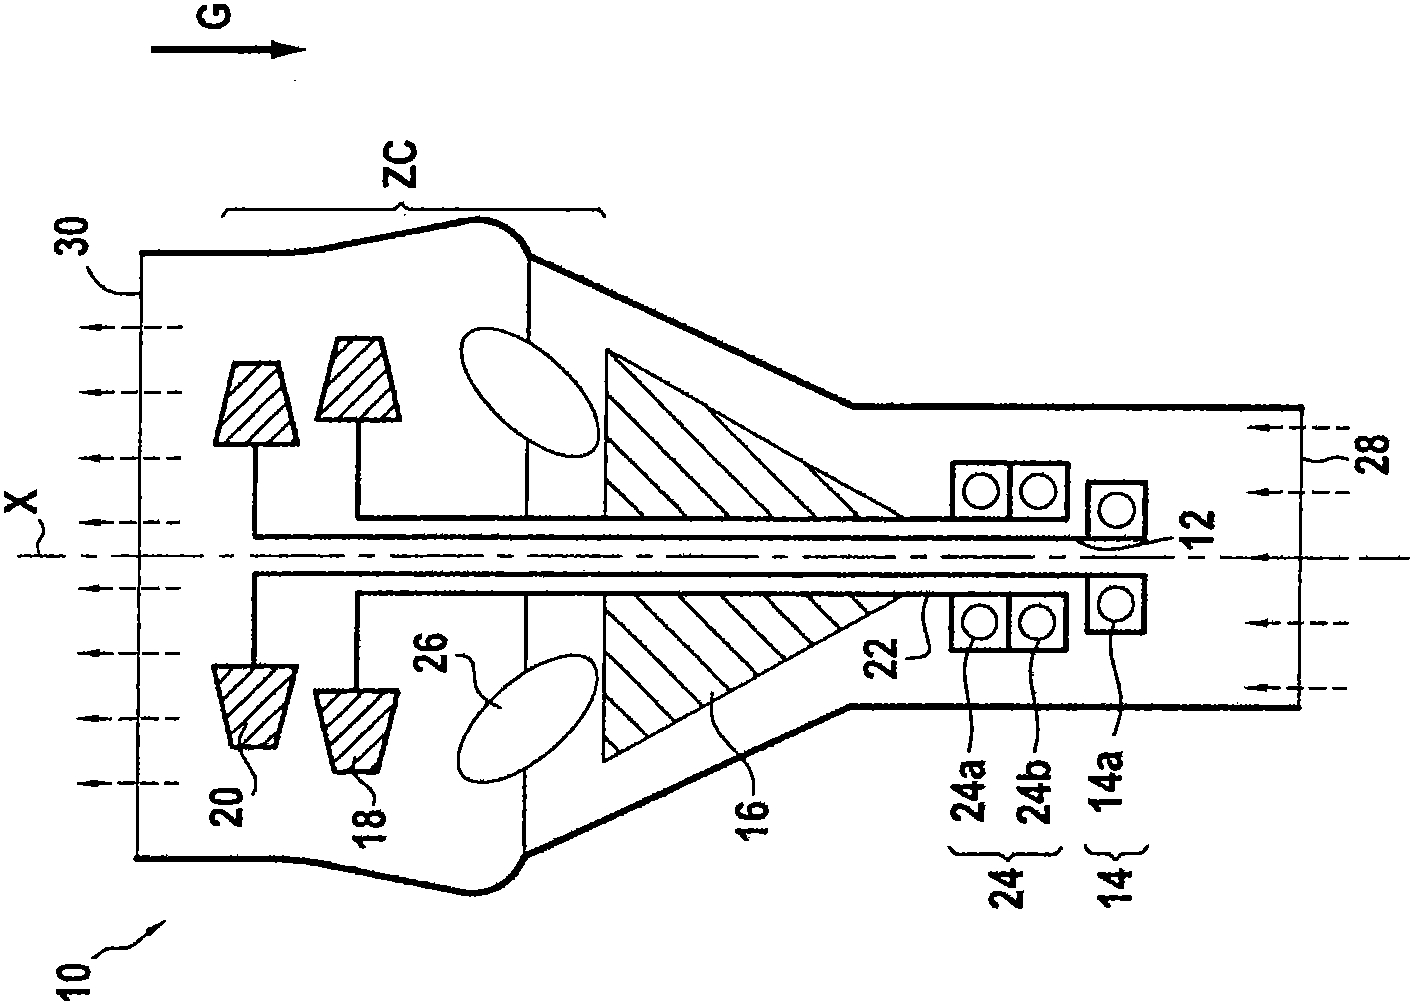 Turbomachine comprising a vertical shaft